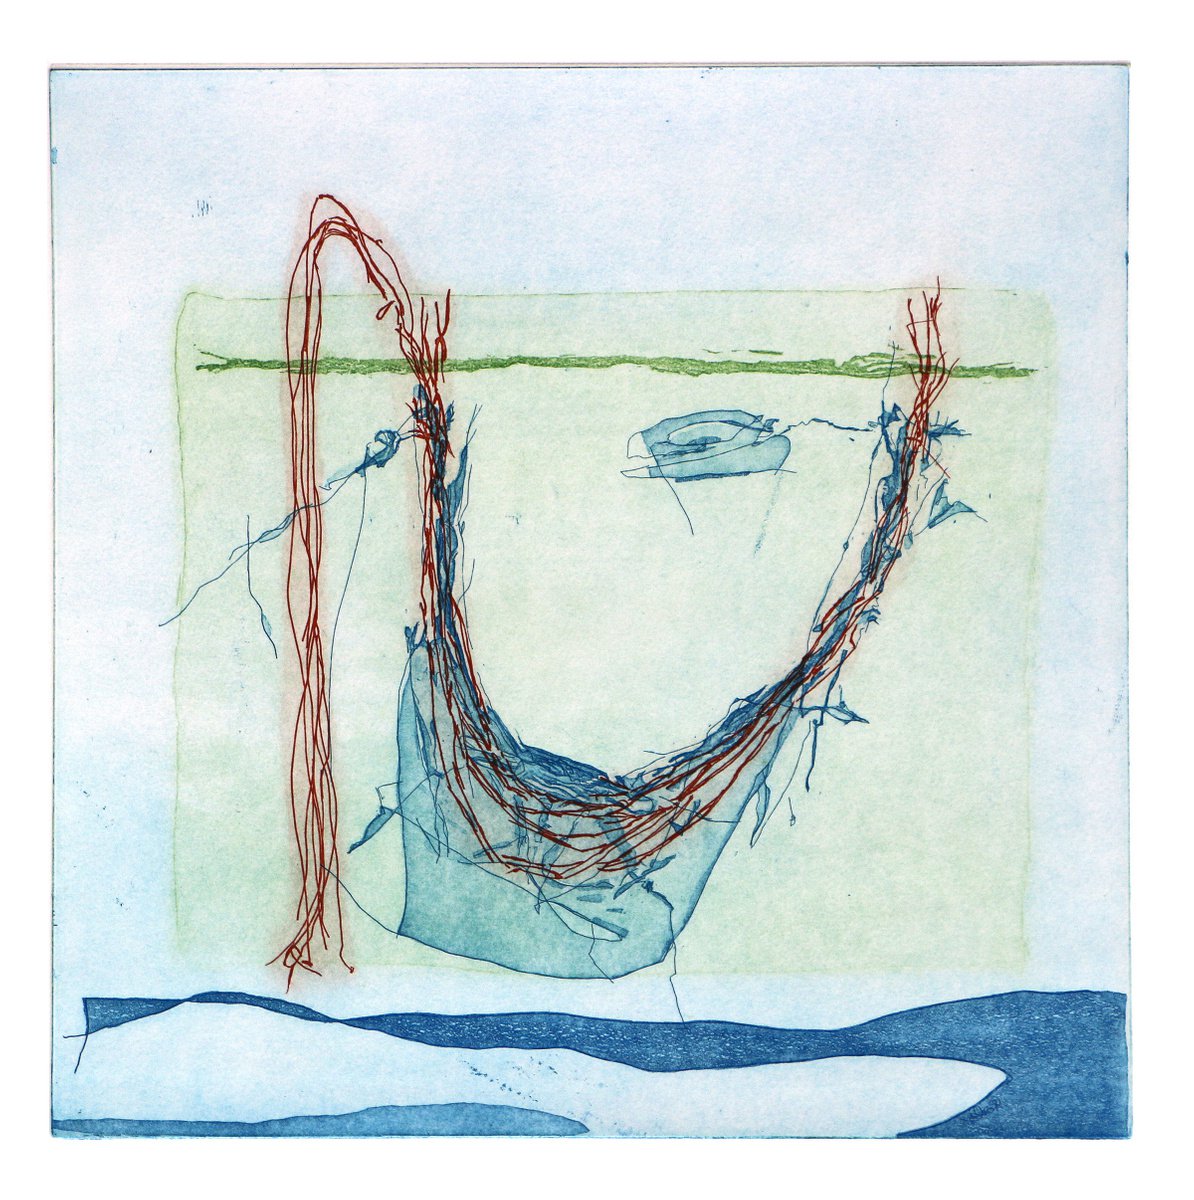 Heike Roesel You turn fine art etching, edition of 20 by Heike Roesel